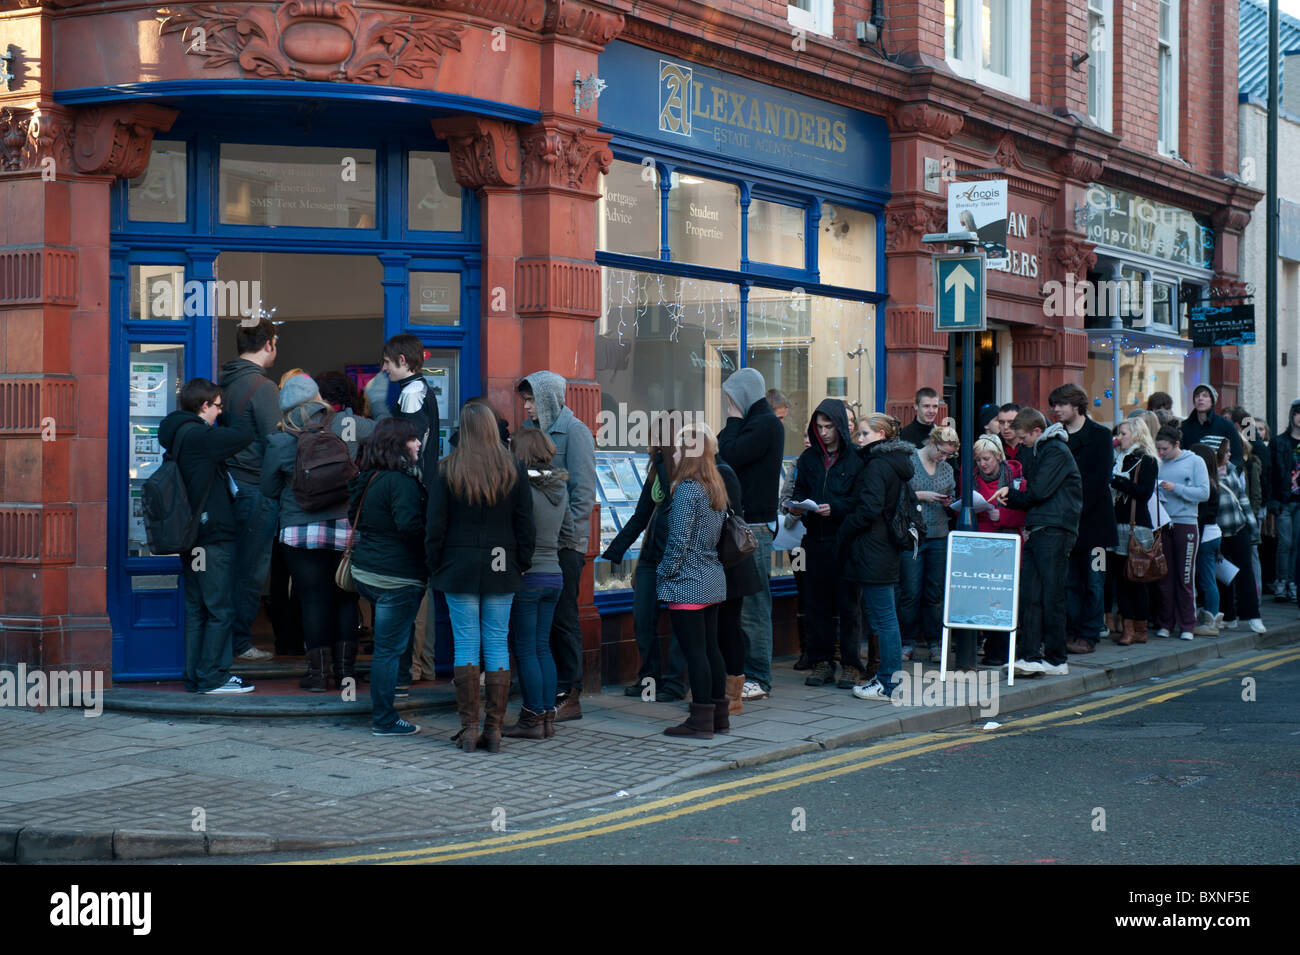 Aberystwyth University students queuing outside Alexanders estate agents to get hold of details of accommodation, Wales UK Stock Photo